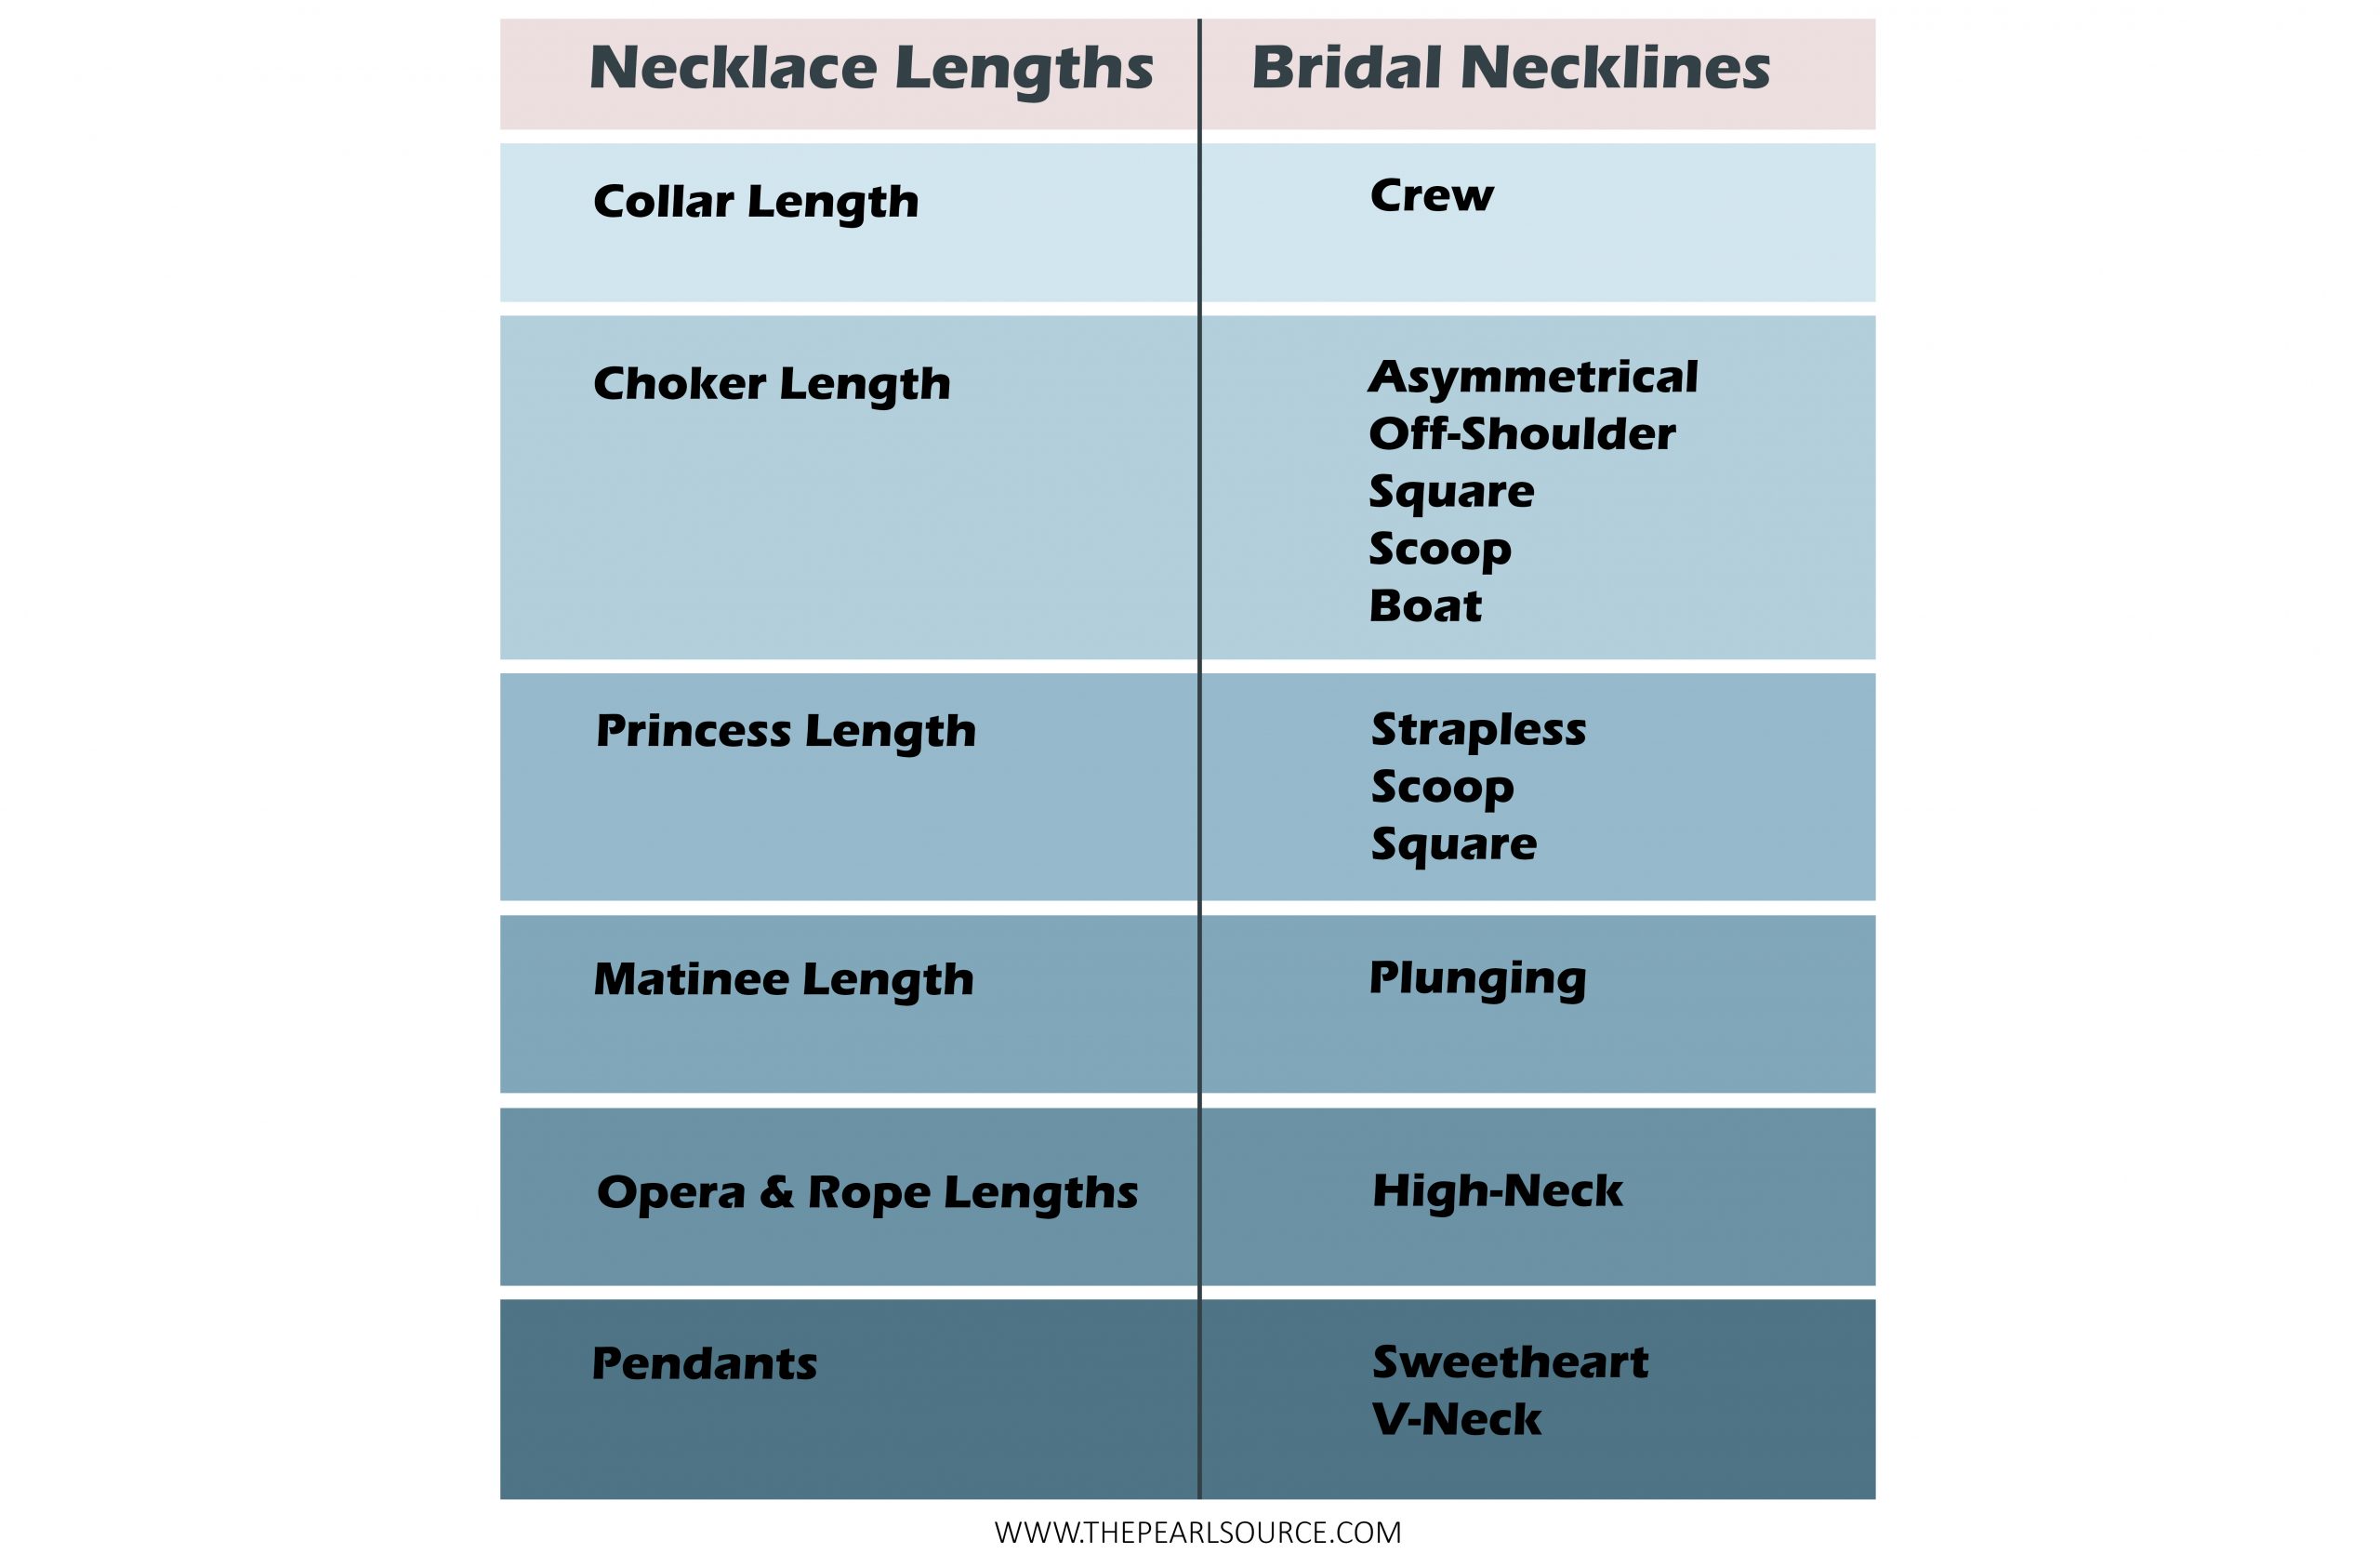 Wedding Dress and Necklace Length